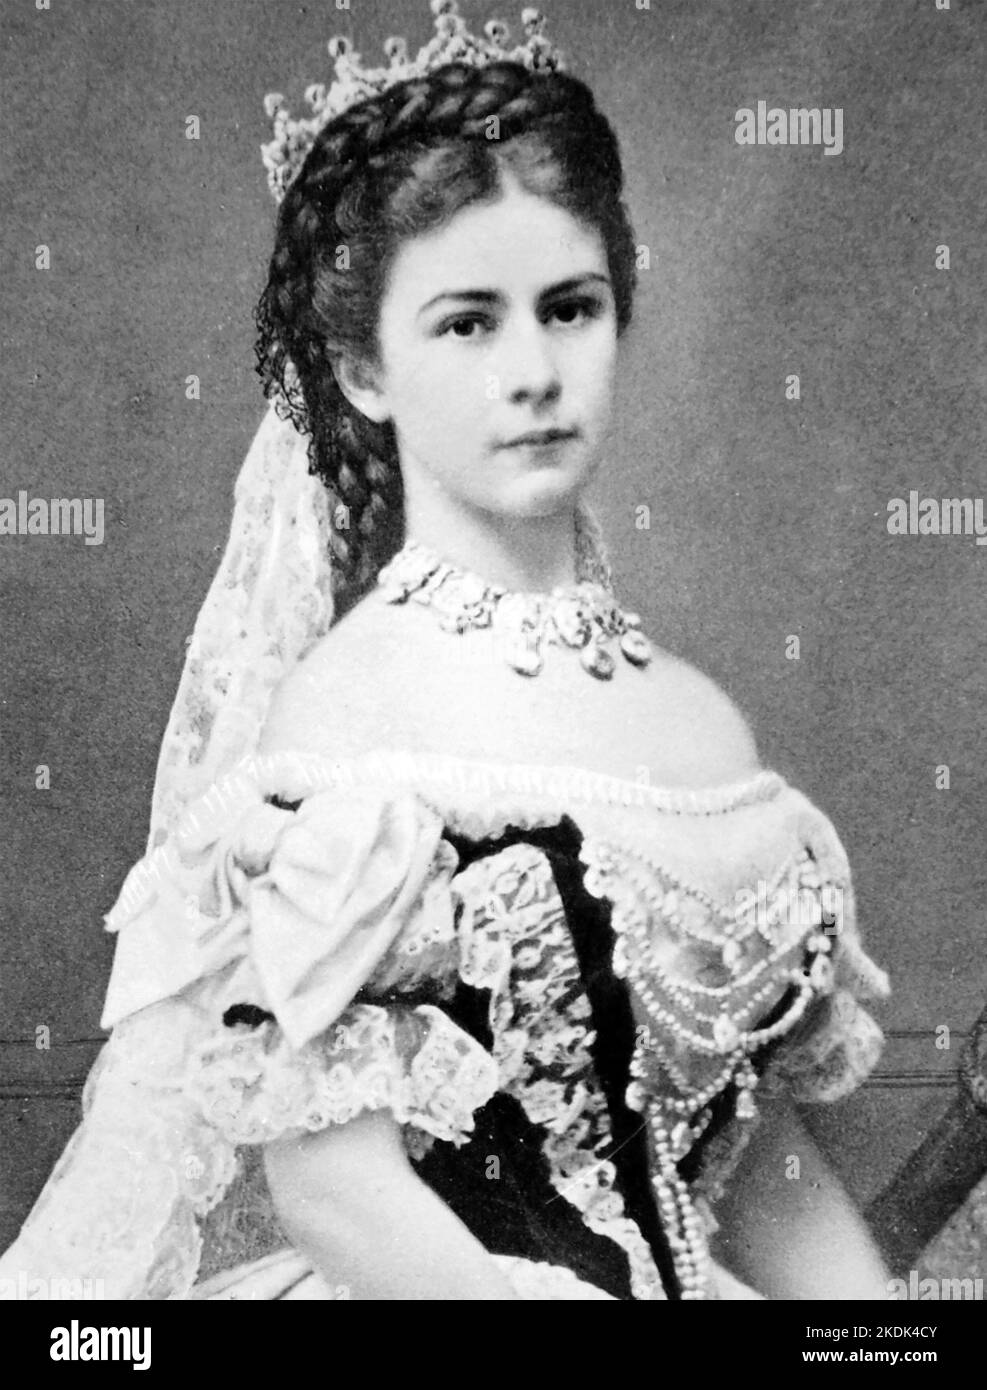 EMPRESS ELISABETH OF AUSTRIA (1837-1898) in her Coronation robes in 1867 Stock Photo